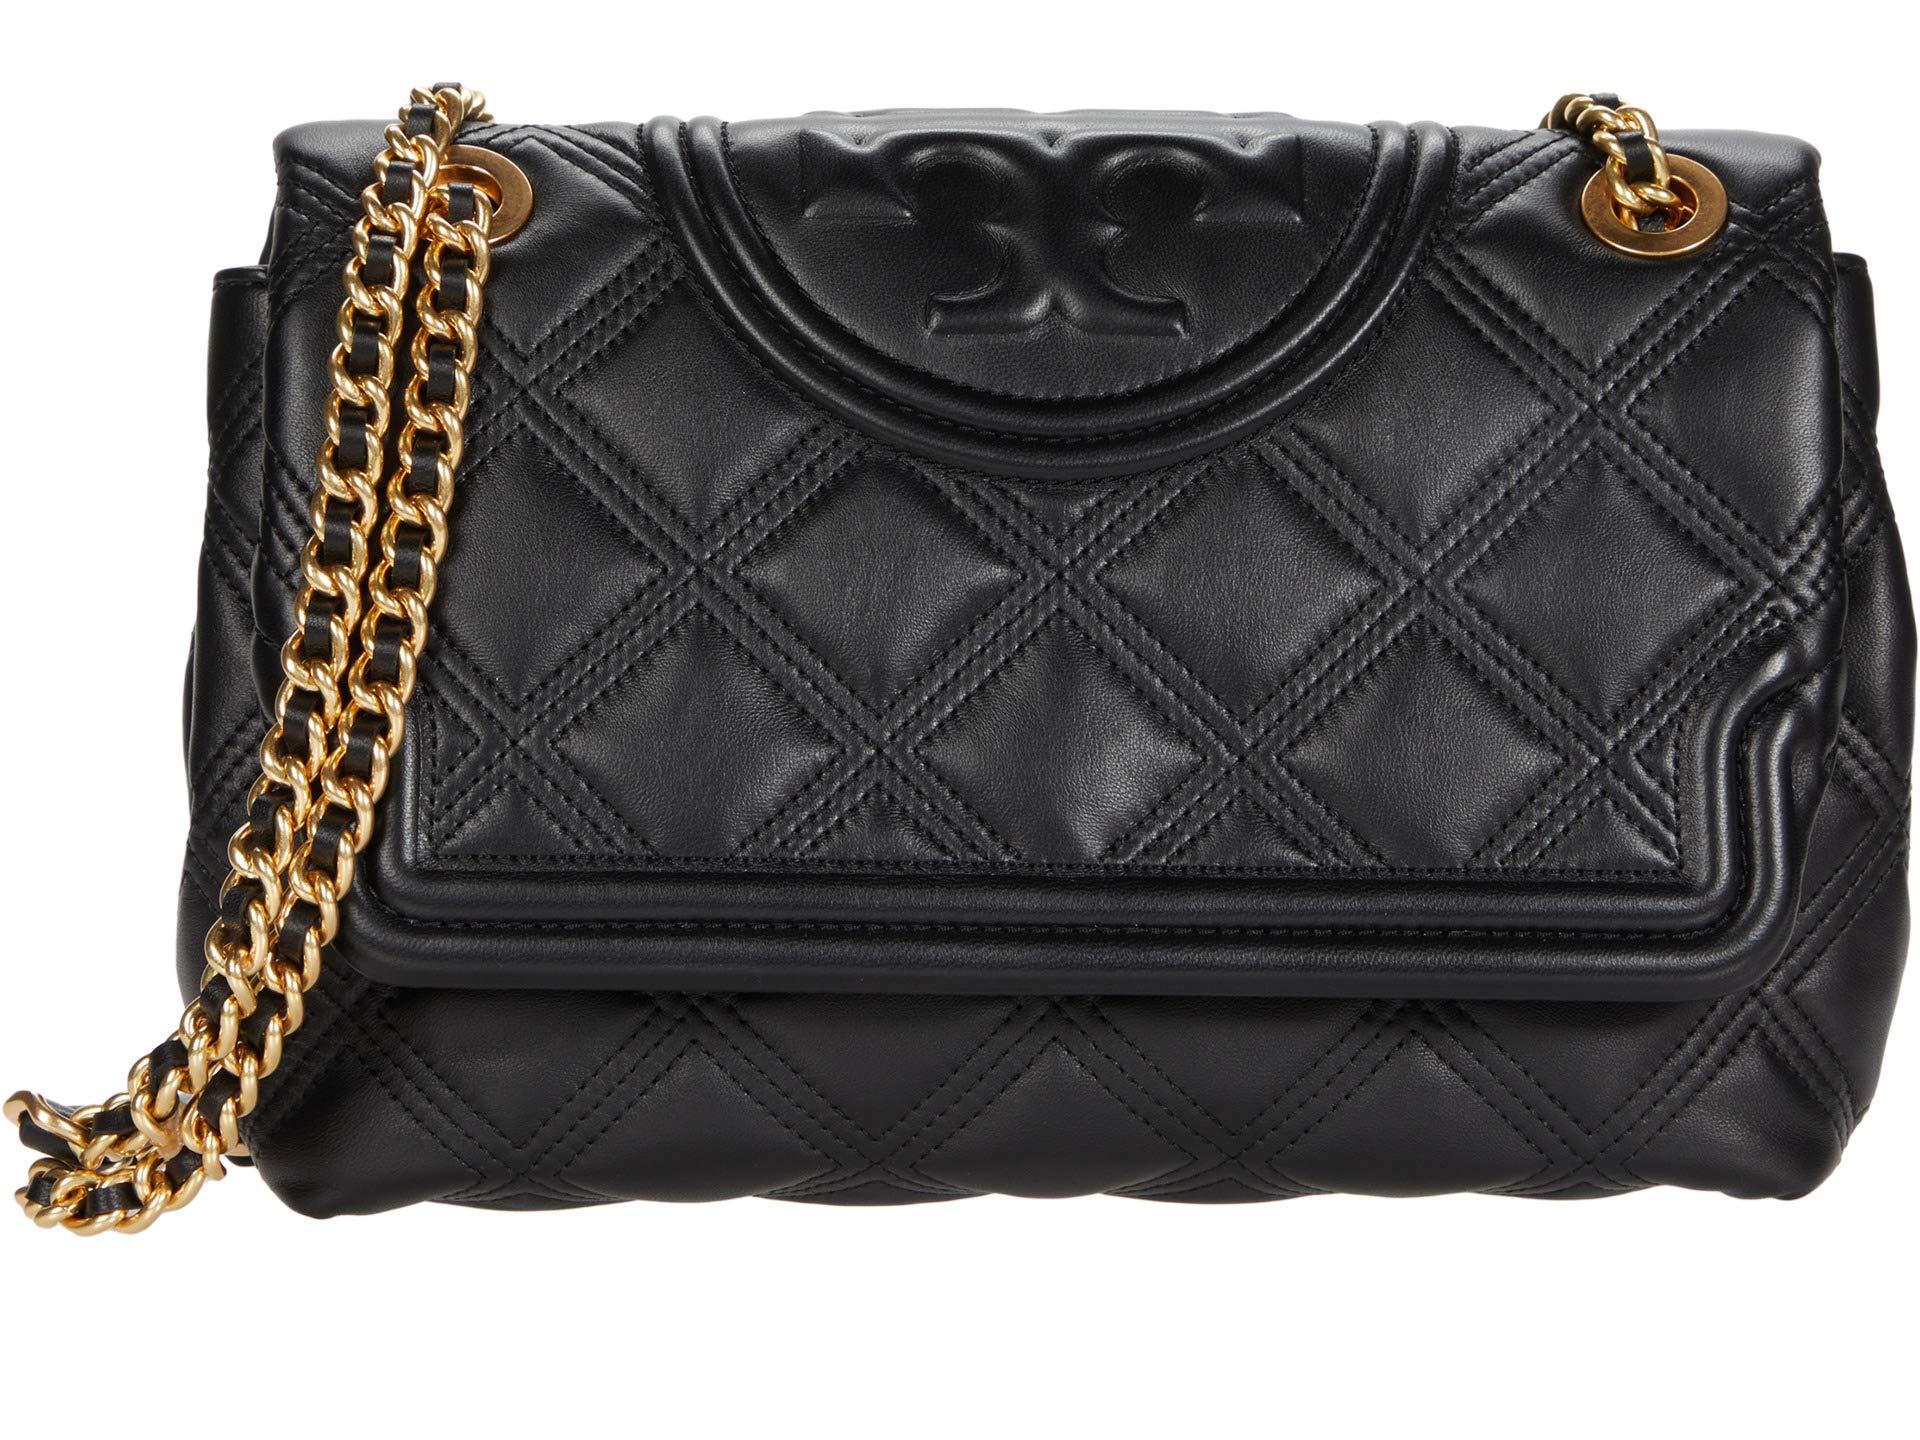 Tory Burch Leather Fleming Soft Convertible Shoulder Bag in Black - Lyst